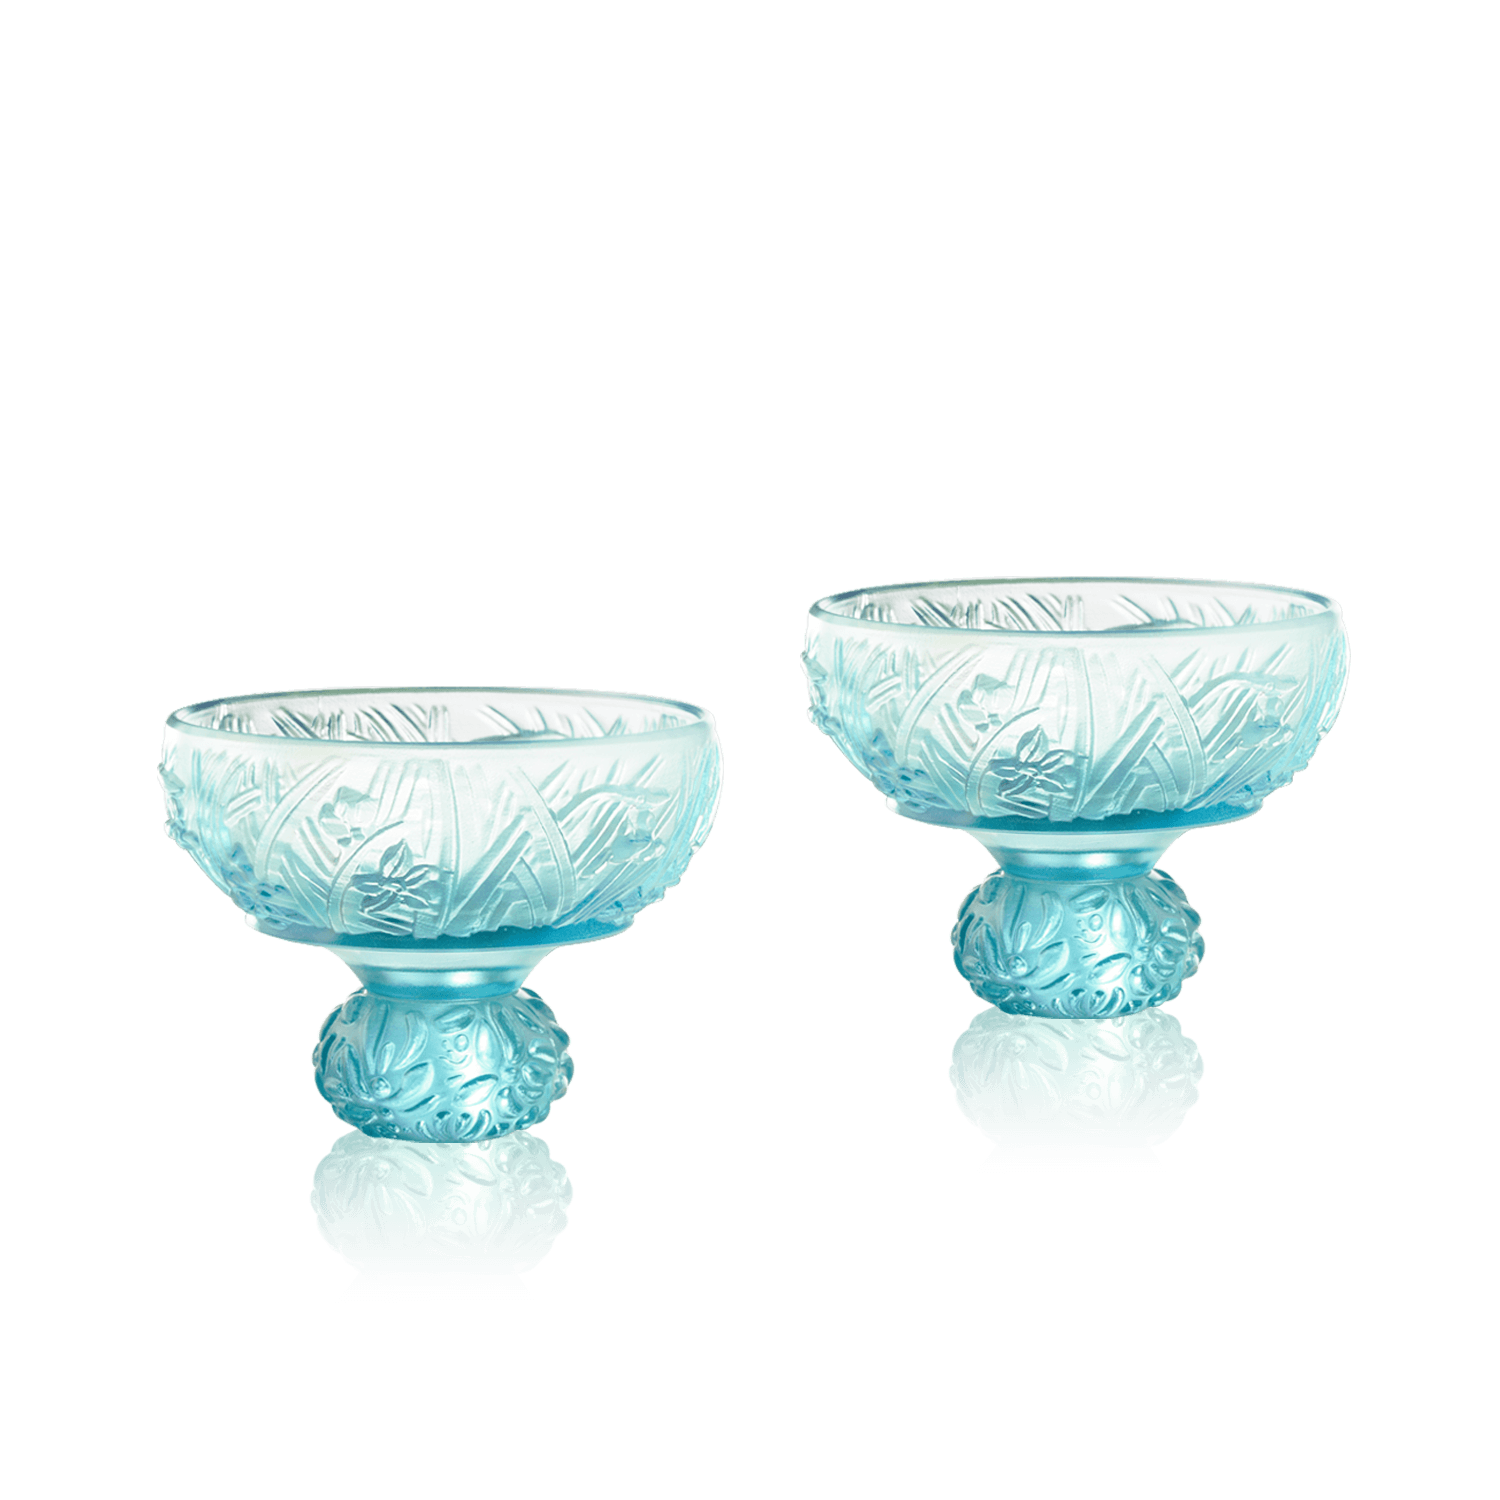 LIULI Crystal Art "Virtuous Orchid" (A Drink to Virtue) - Sake Glass, Shot Glass (Set of 2)